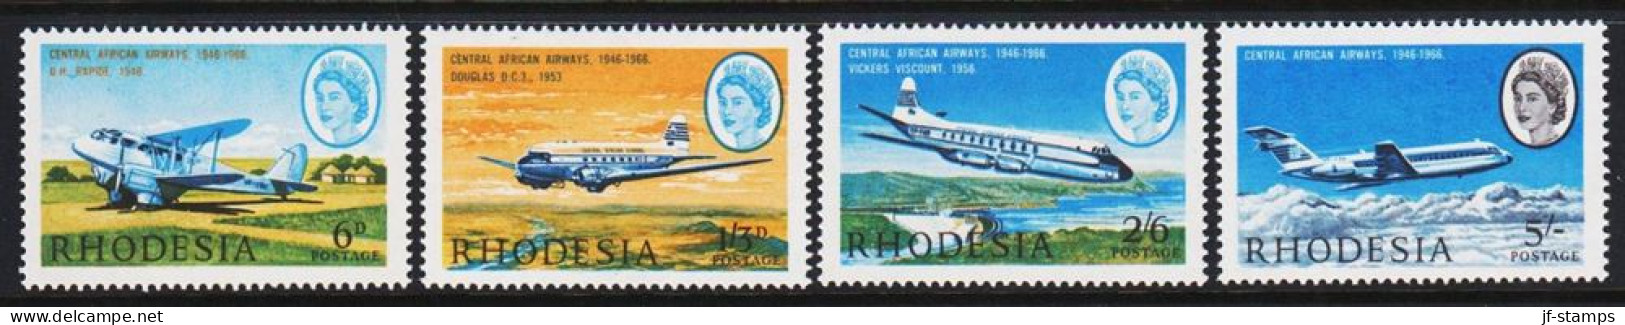 1966. RHODESIA. CENTRAL AFRICAN AIRWAYS. Complete Set With 4 Stamps Never Hinged.  (Michel 42-45) - JF545283 - Rhodesië (1964-1980)